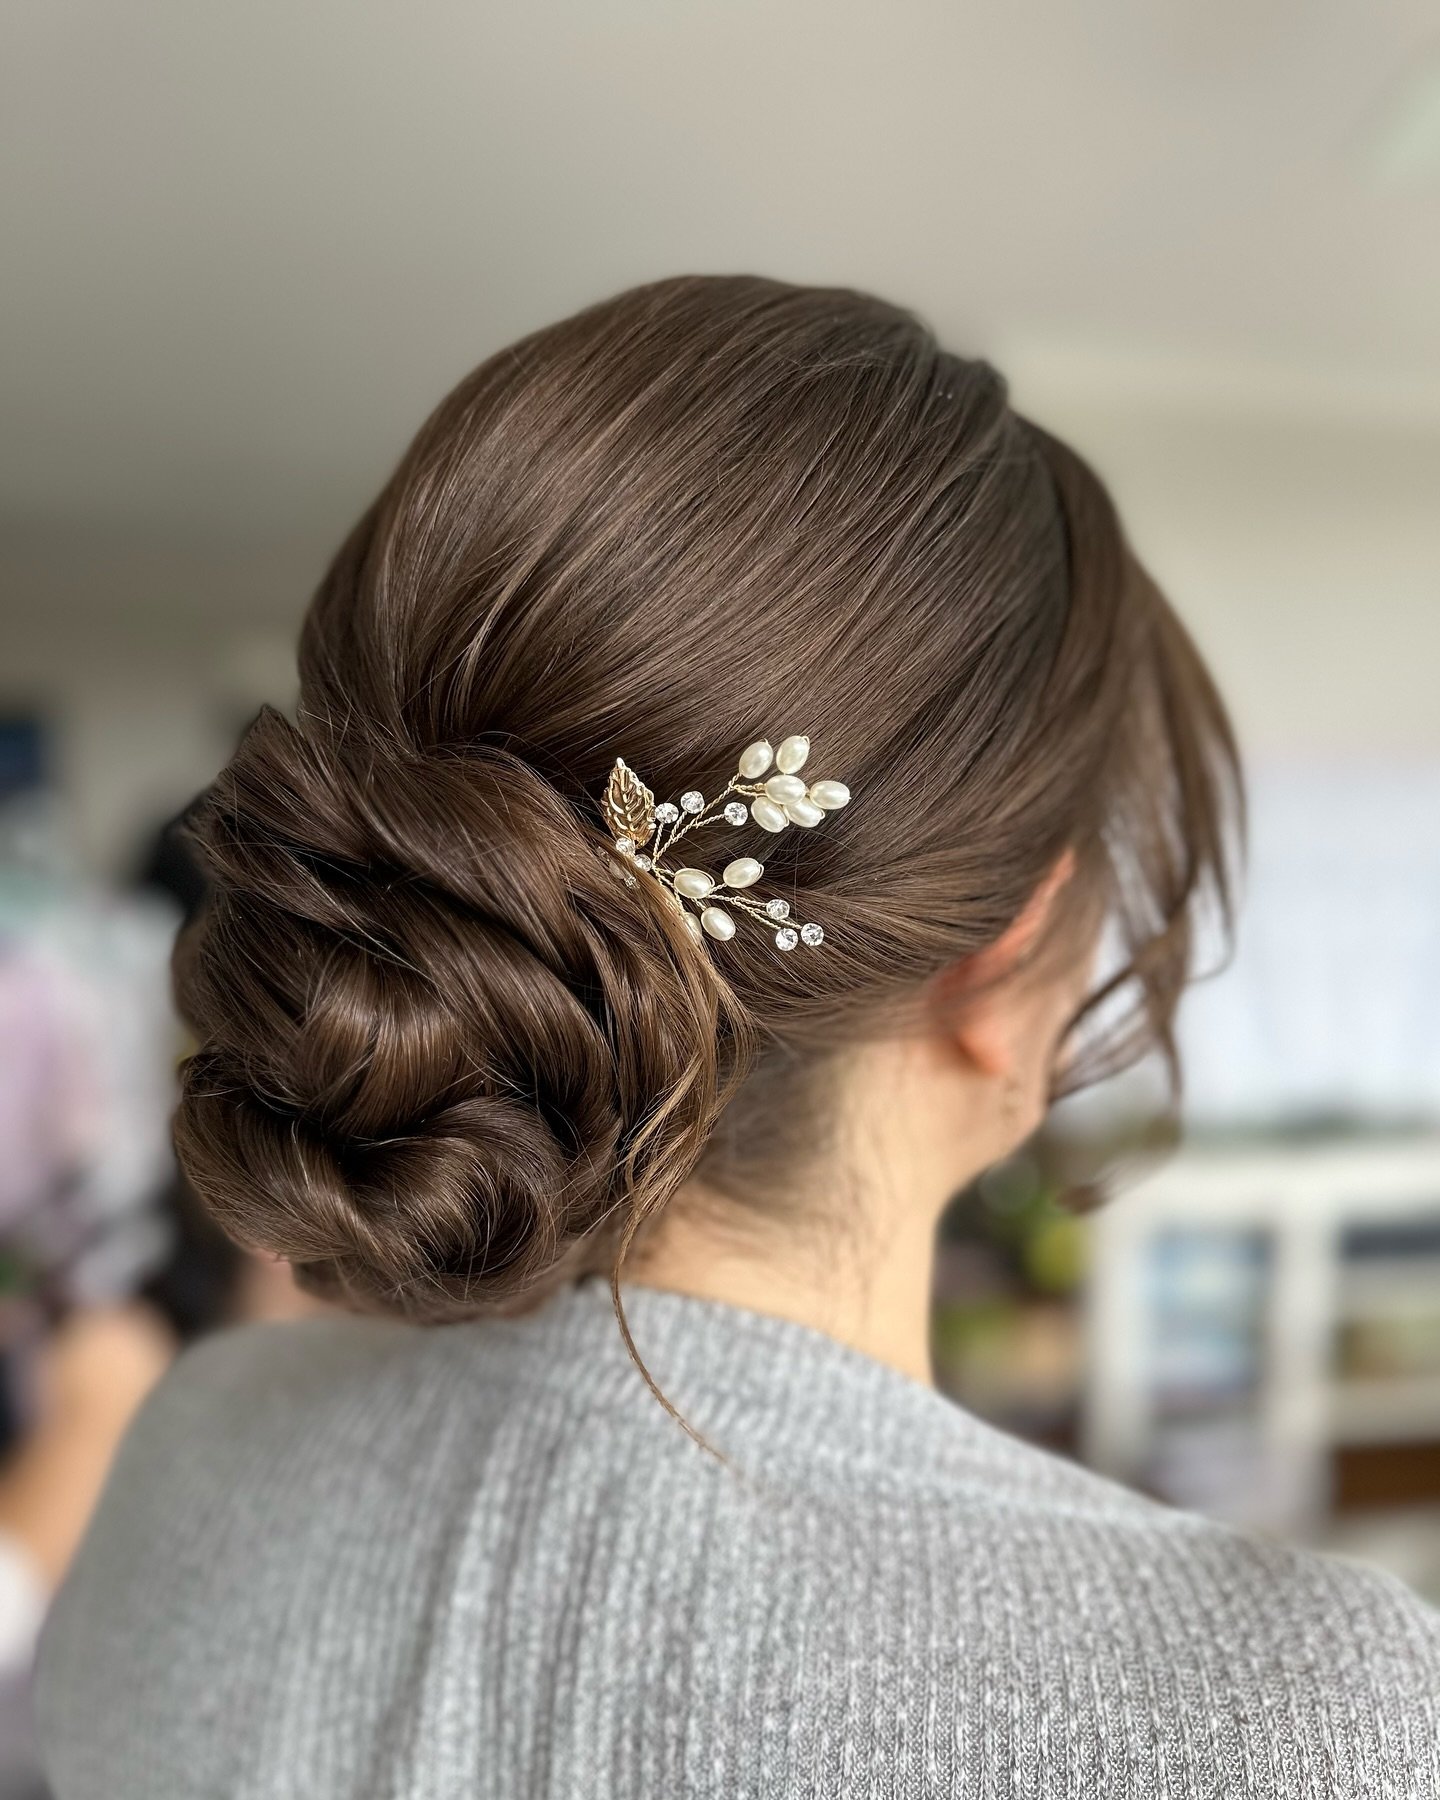 Save this bun for your mid length haired bridesmaids, it&rsquo;s perfect for those with fine hair too as you can create the illusion of more volume!

Still need to book someone for Spring? Don&rsquo;t delay as dates are now limited! Reach out via the